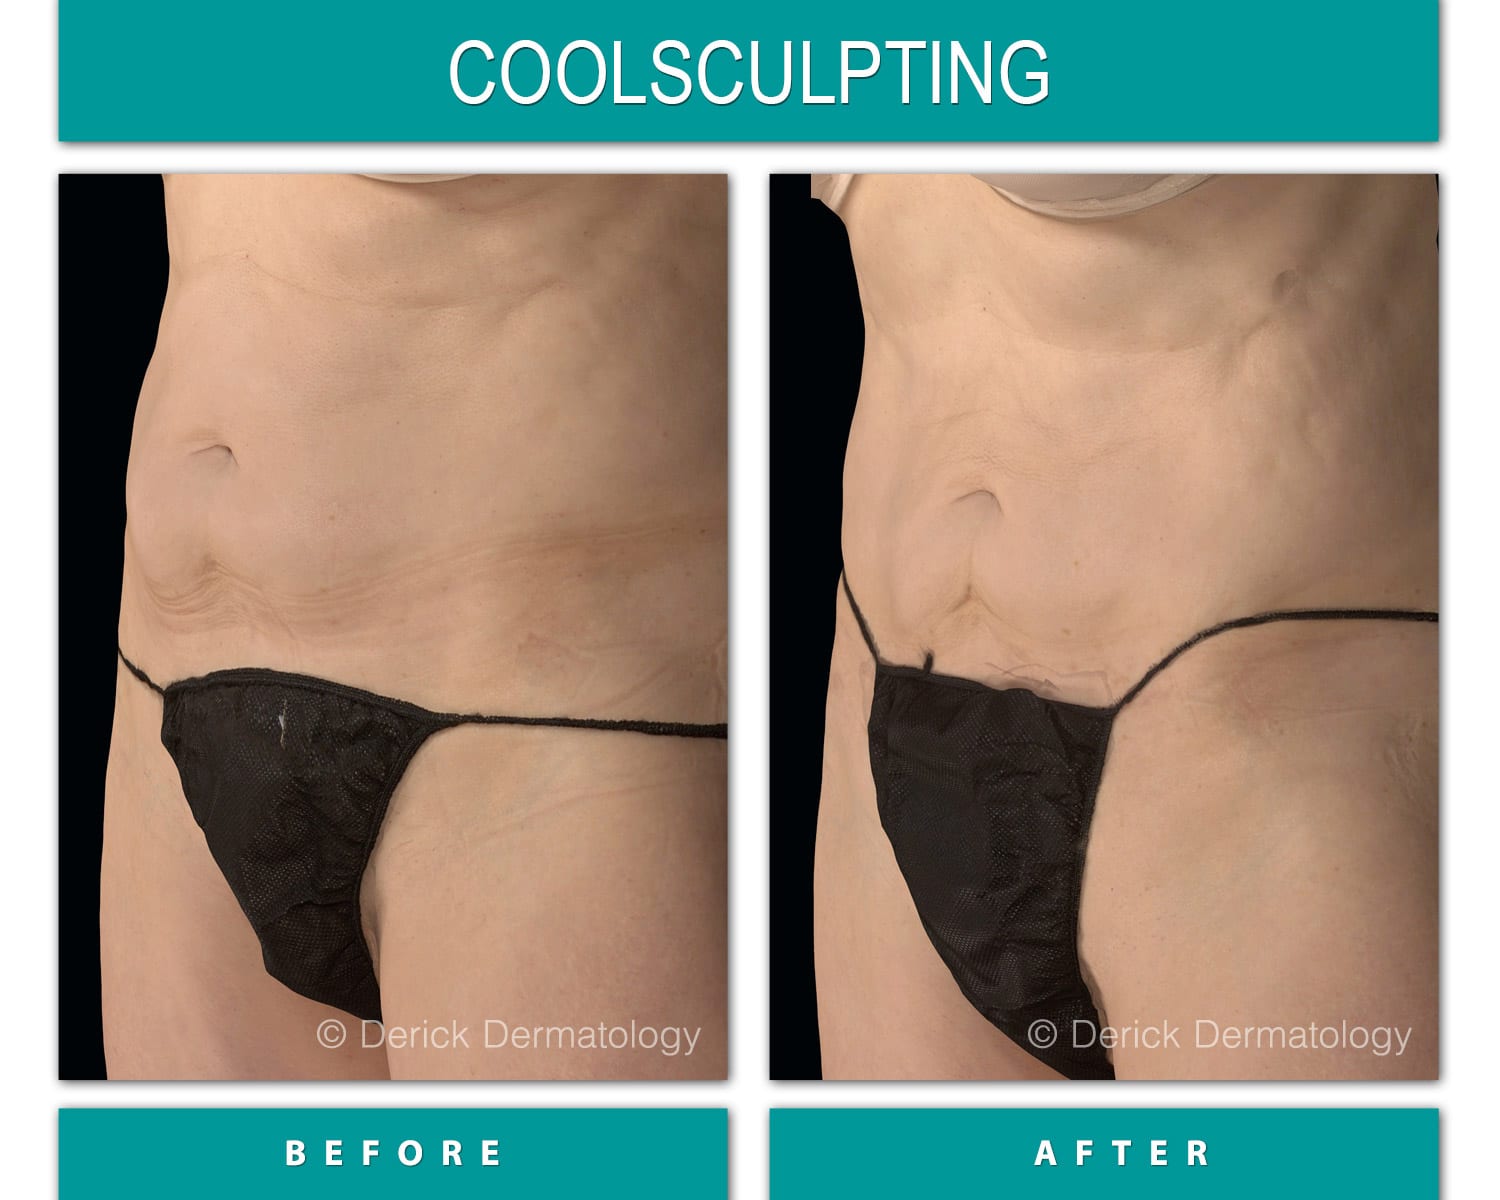 Before & After Gallery - CoolSculpting - Derick Dermatology